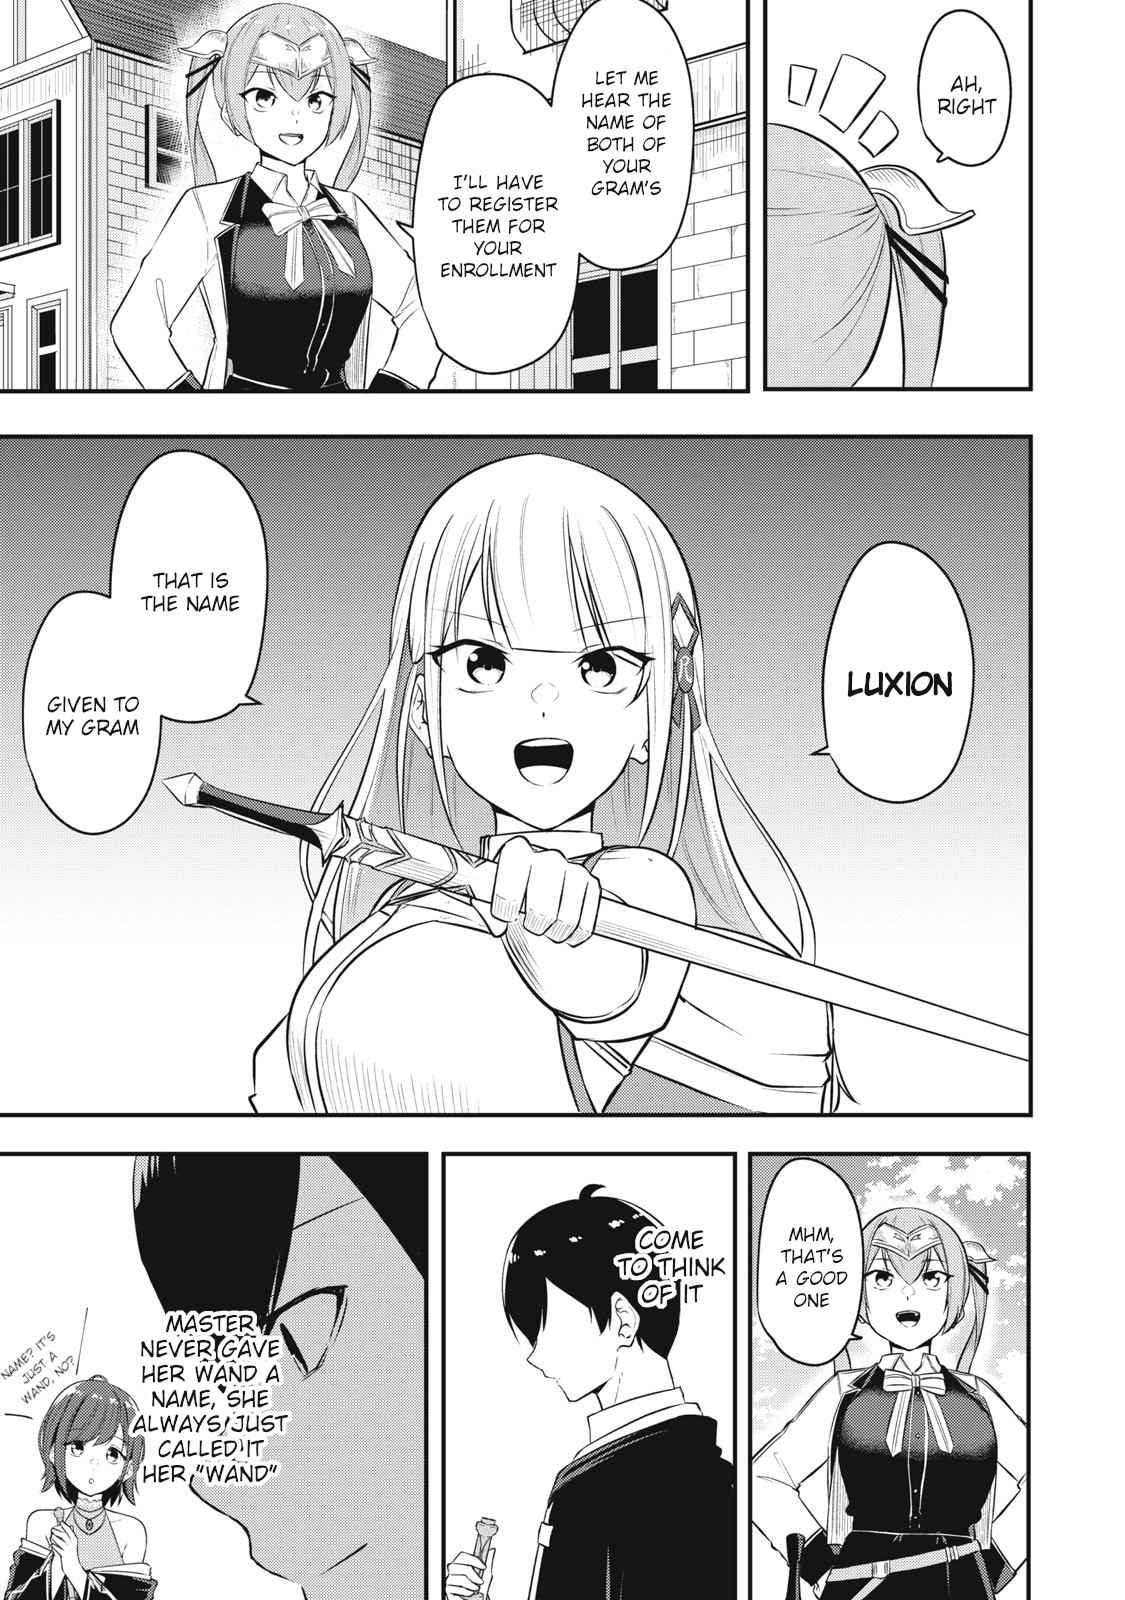 The Last Sage of the Imperial Sword Academy Chapter 5